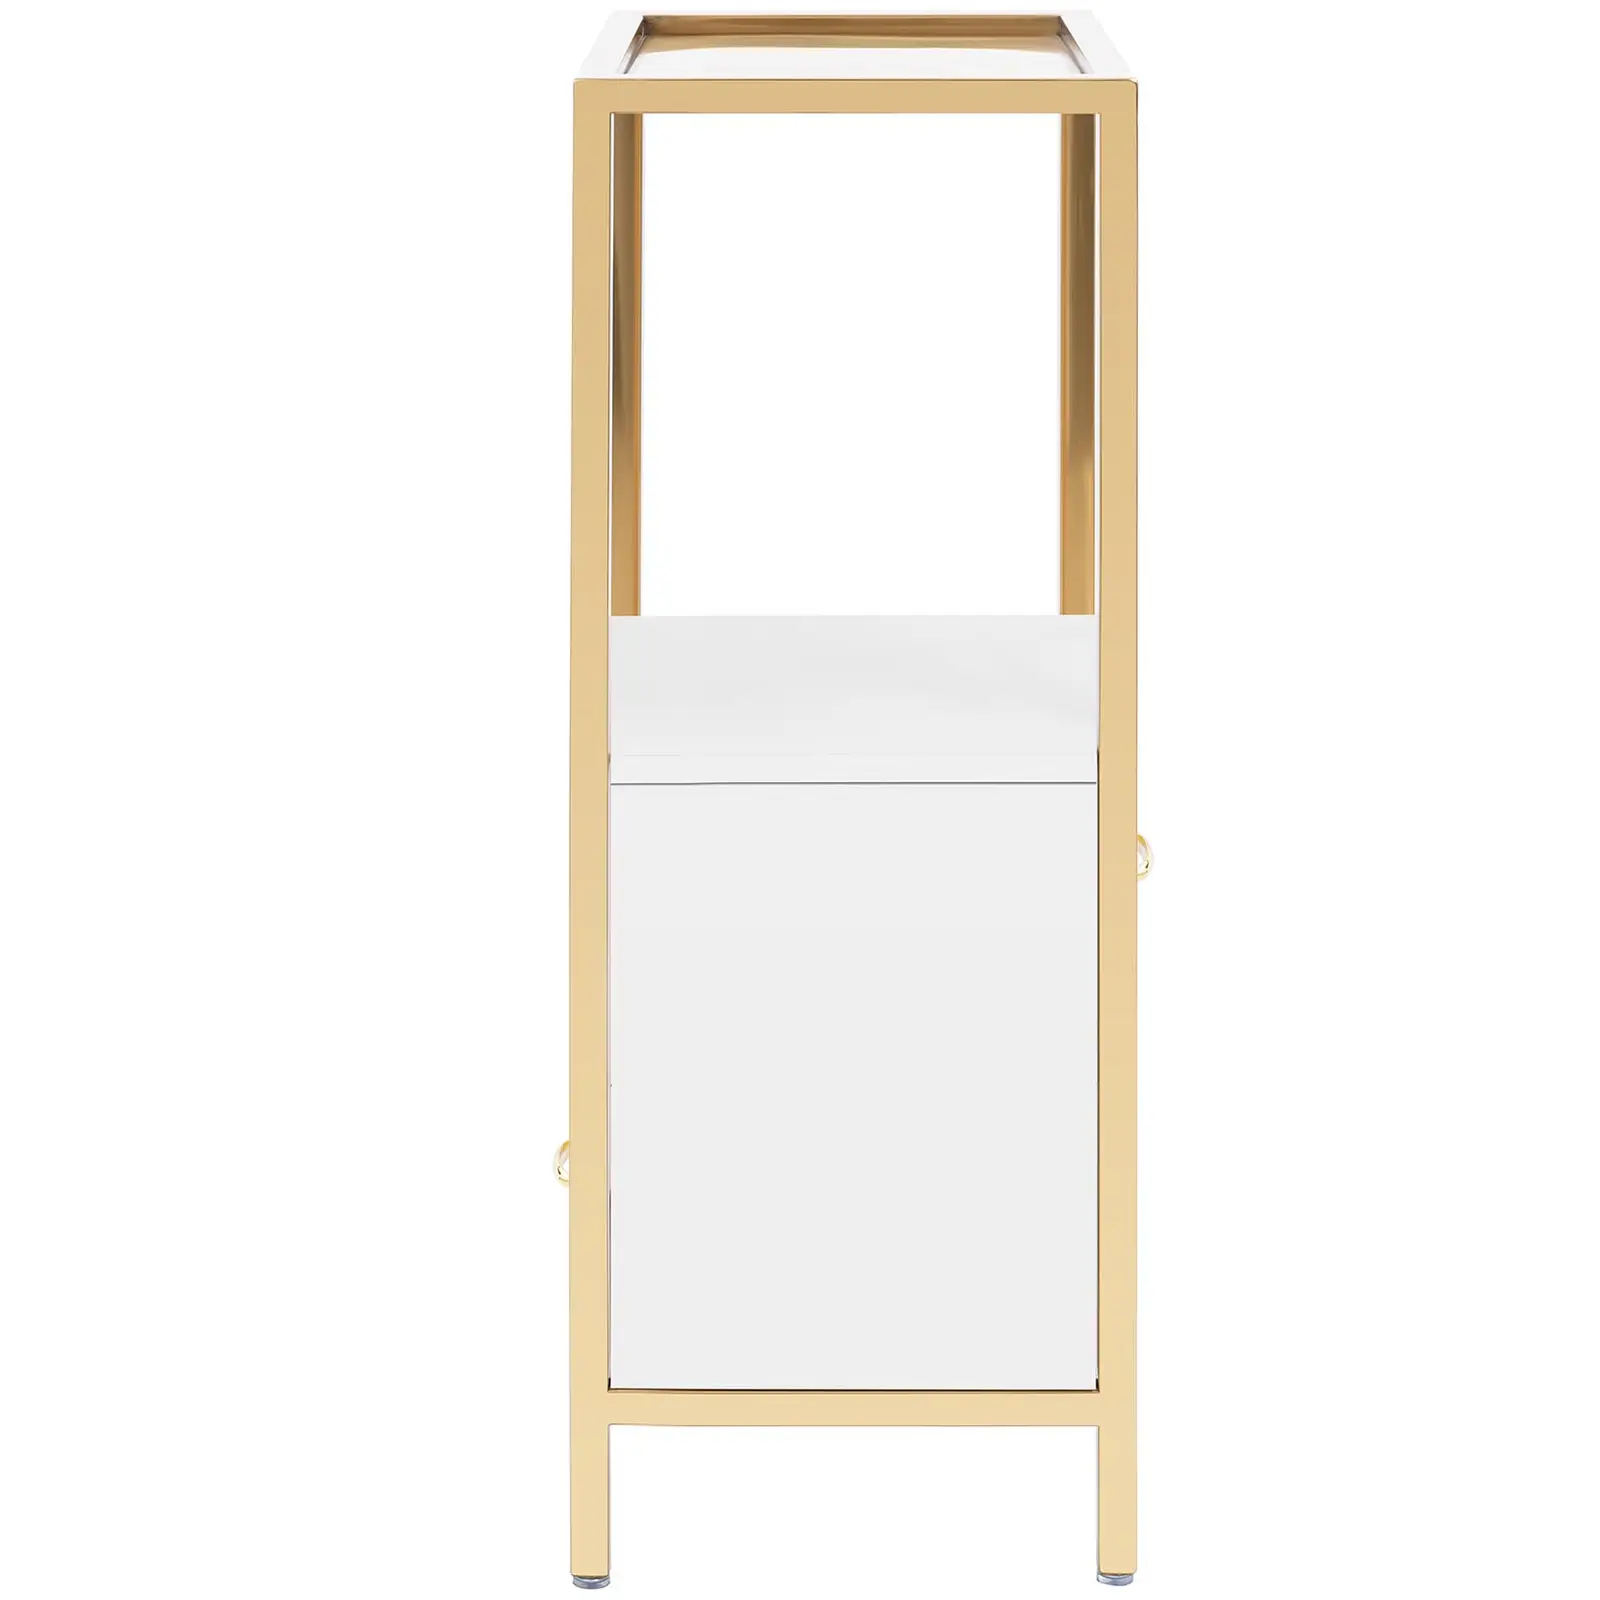 Beauty Cabinet - 40 x 30 x 80 cm - 2 drawers - gold / white